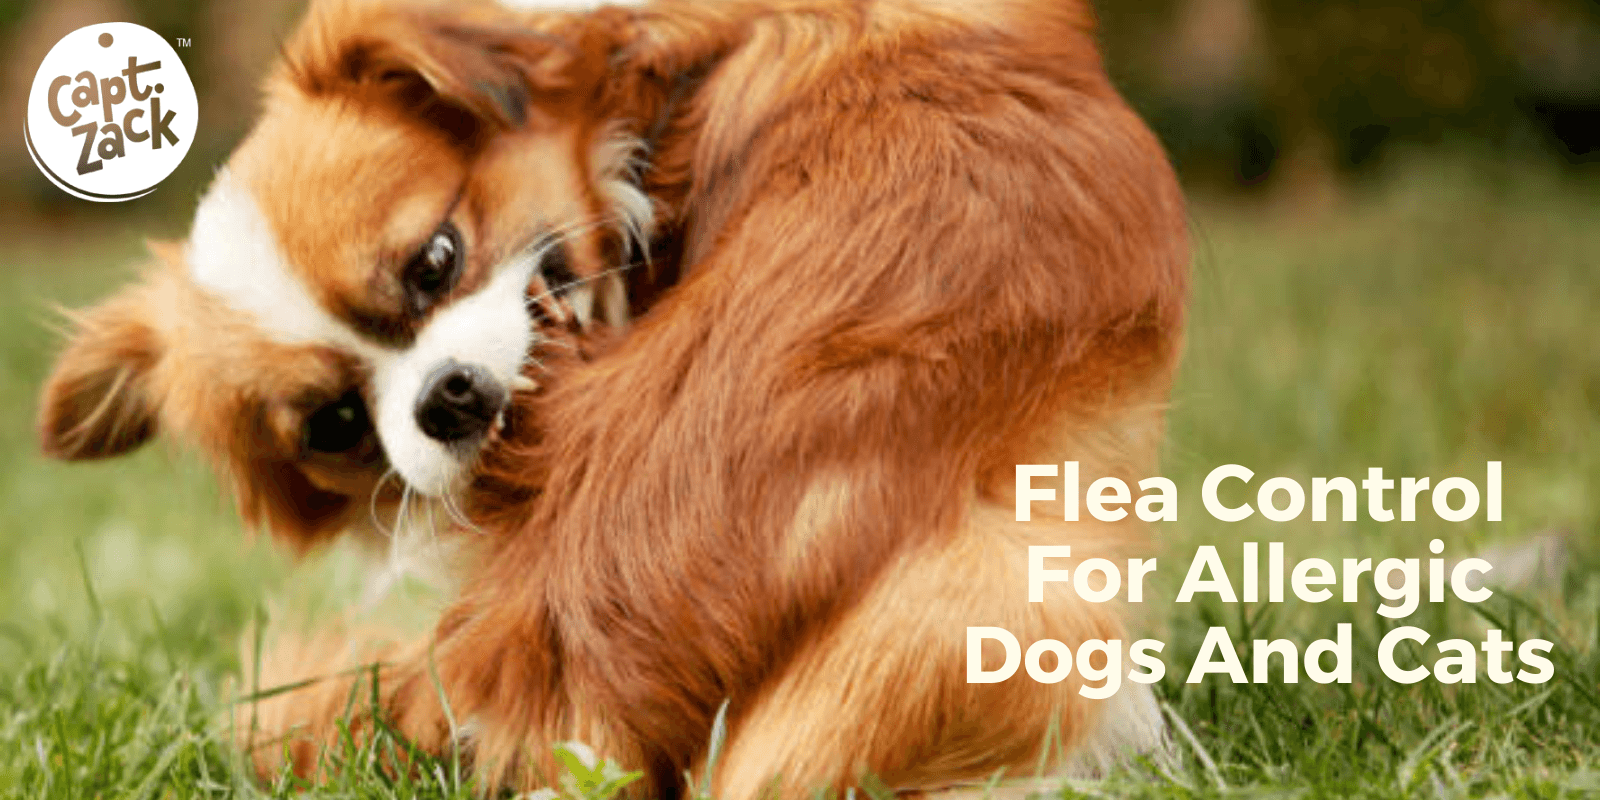 Flea Control For Allergic Dogs And Cats - Captain Zack